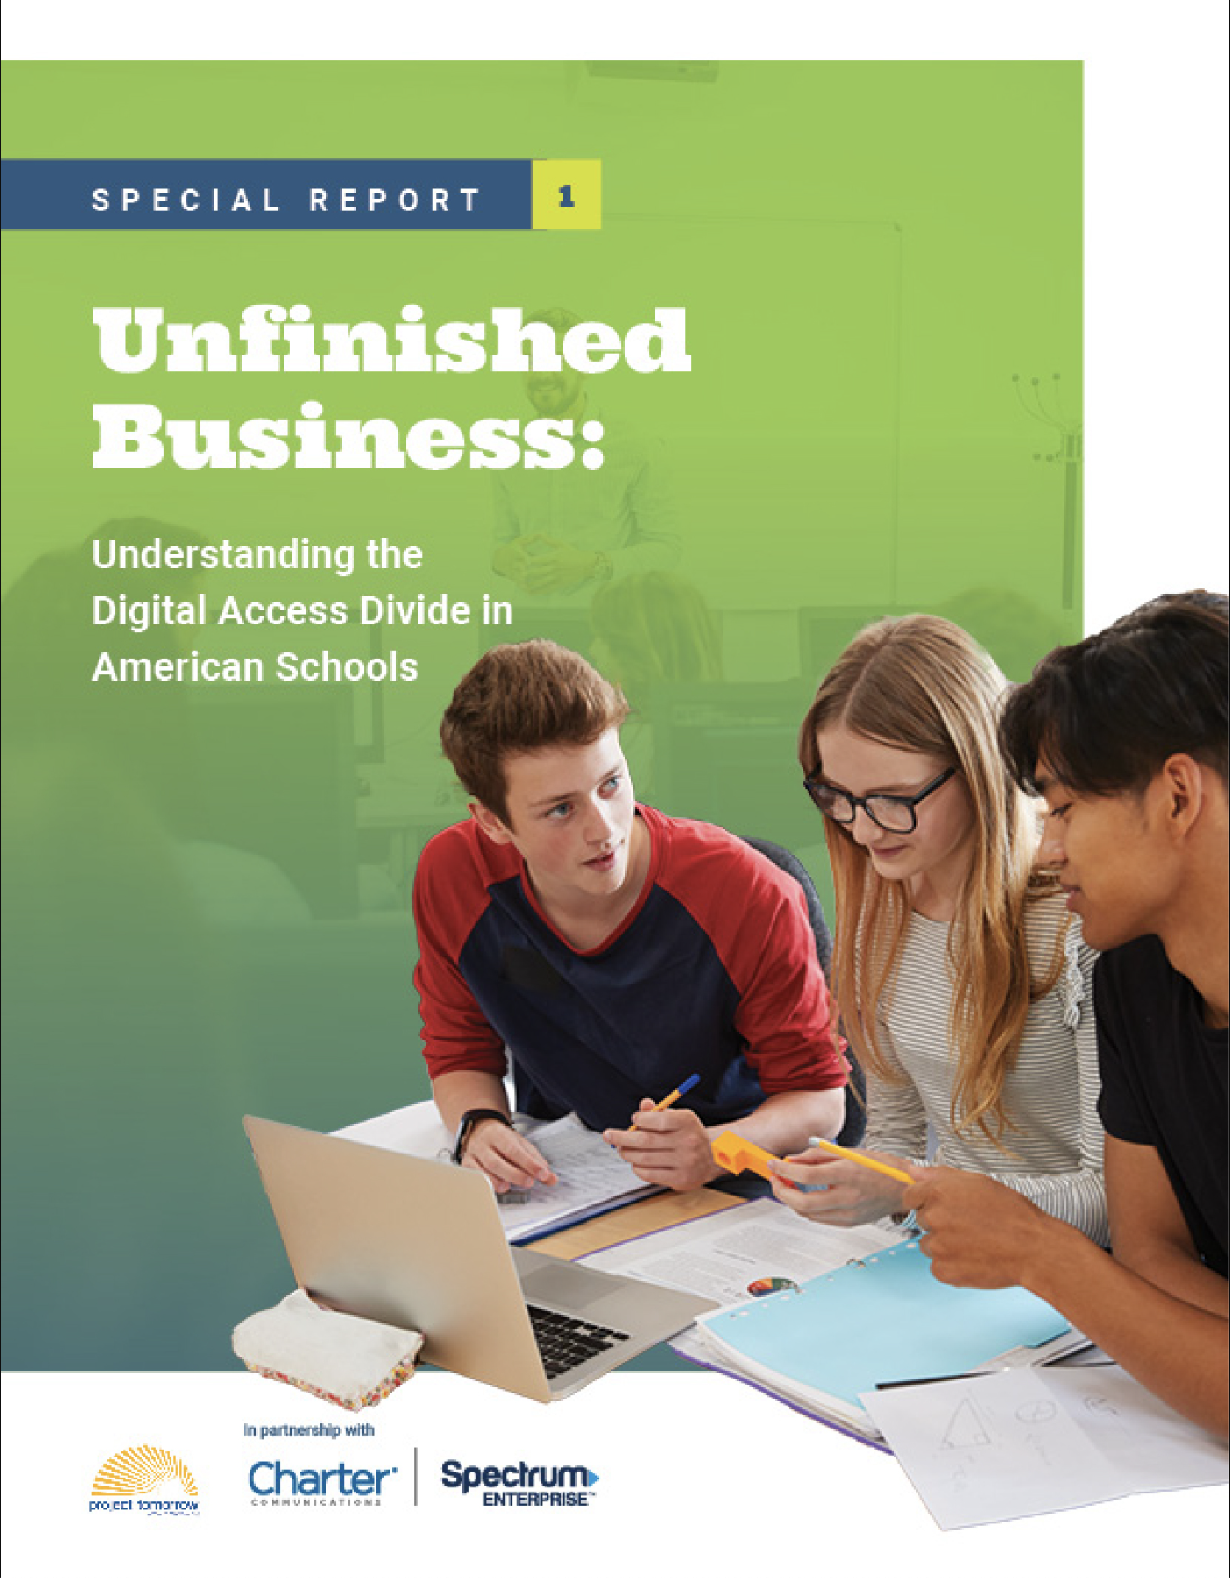 Report Cover Image of students collaborating with technology